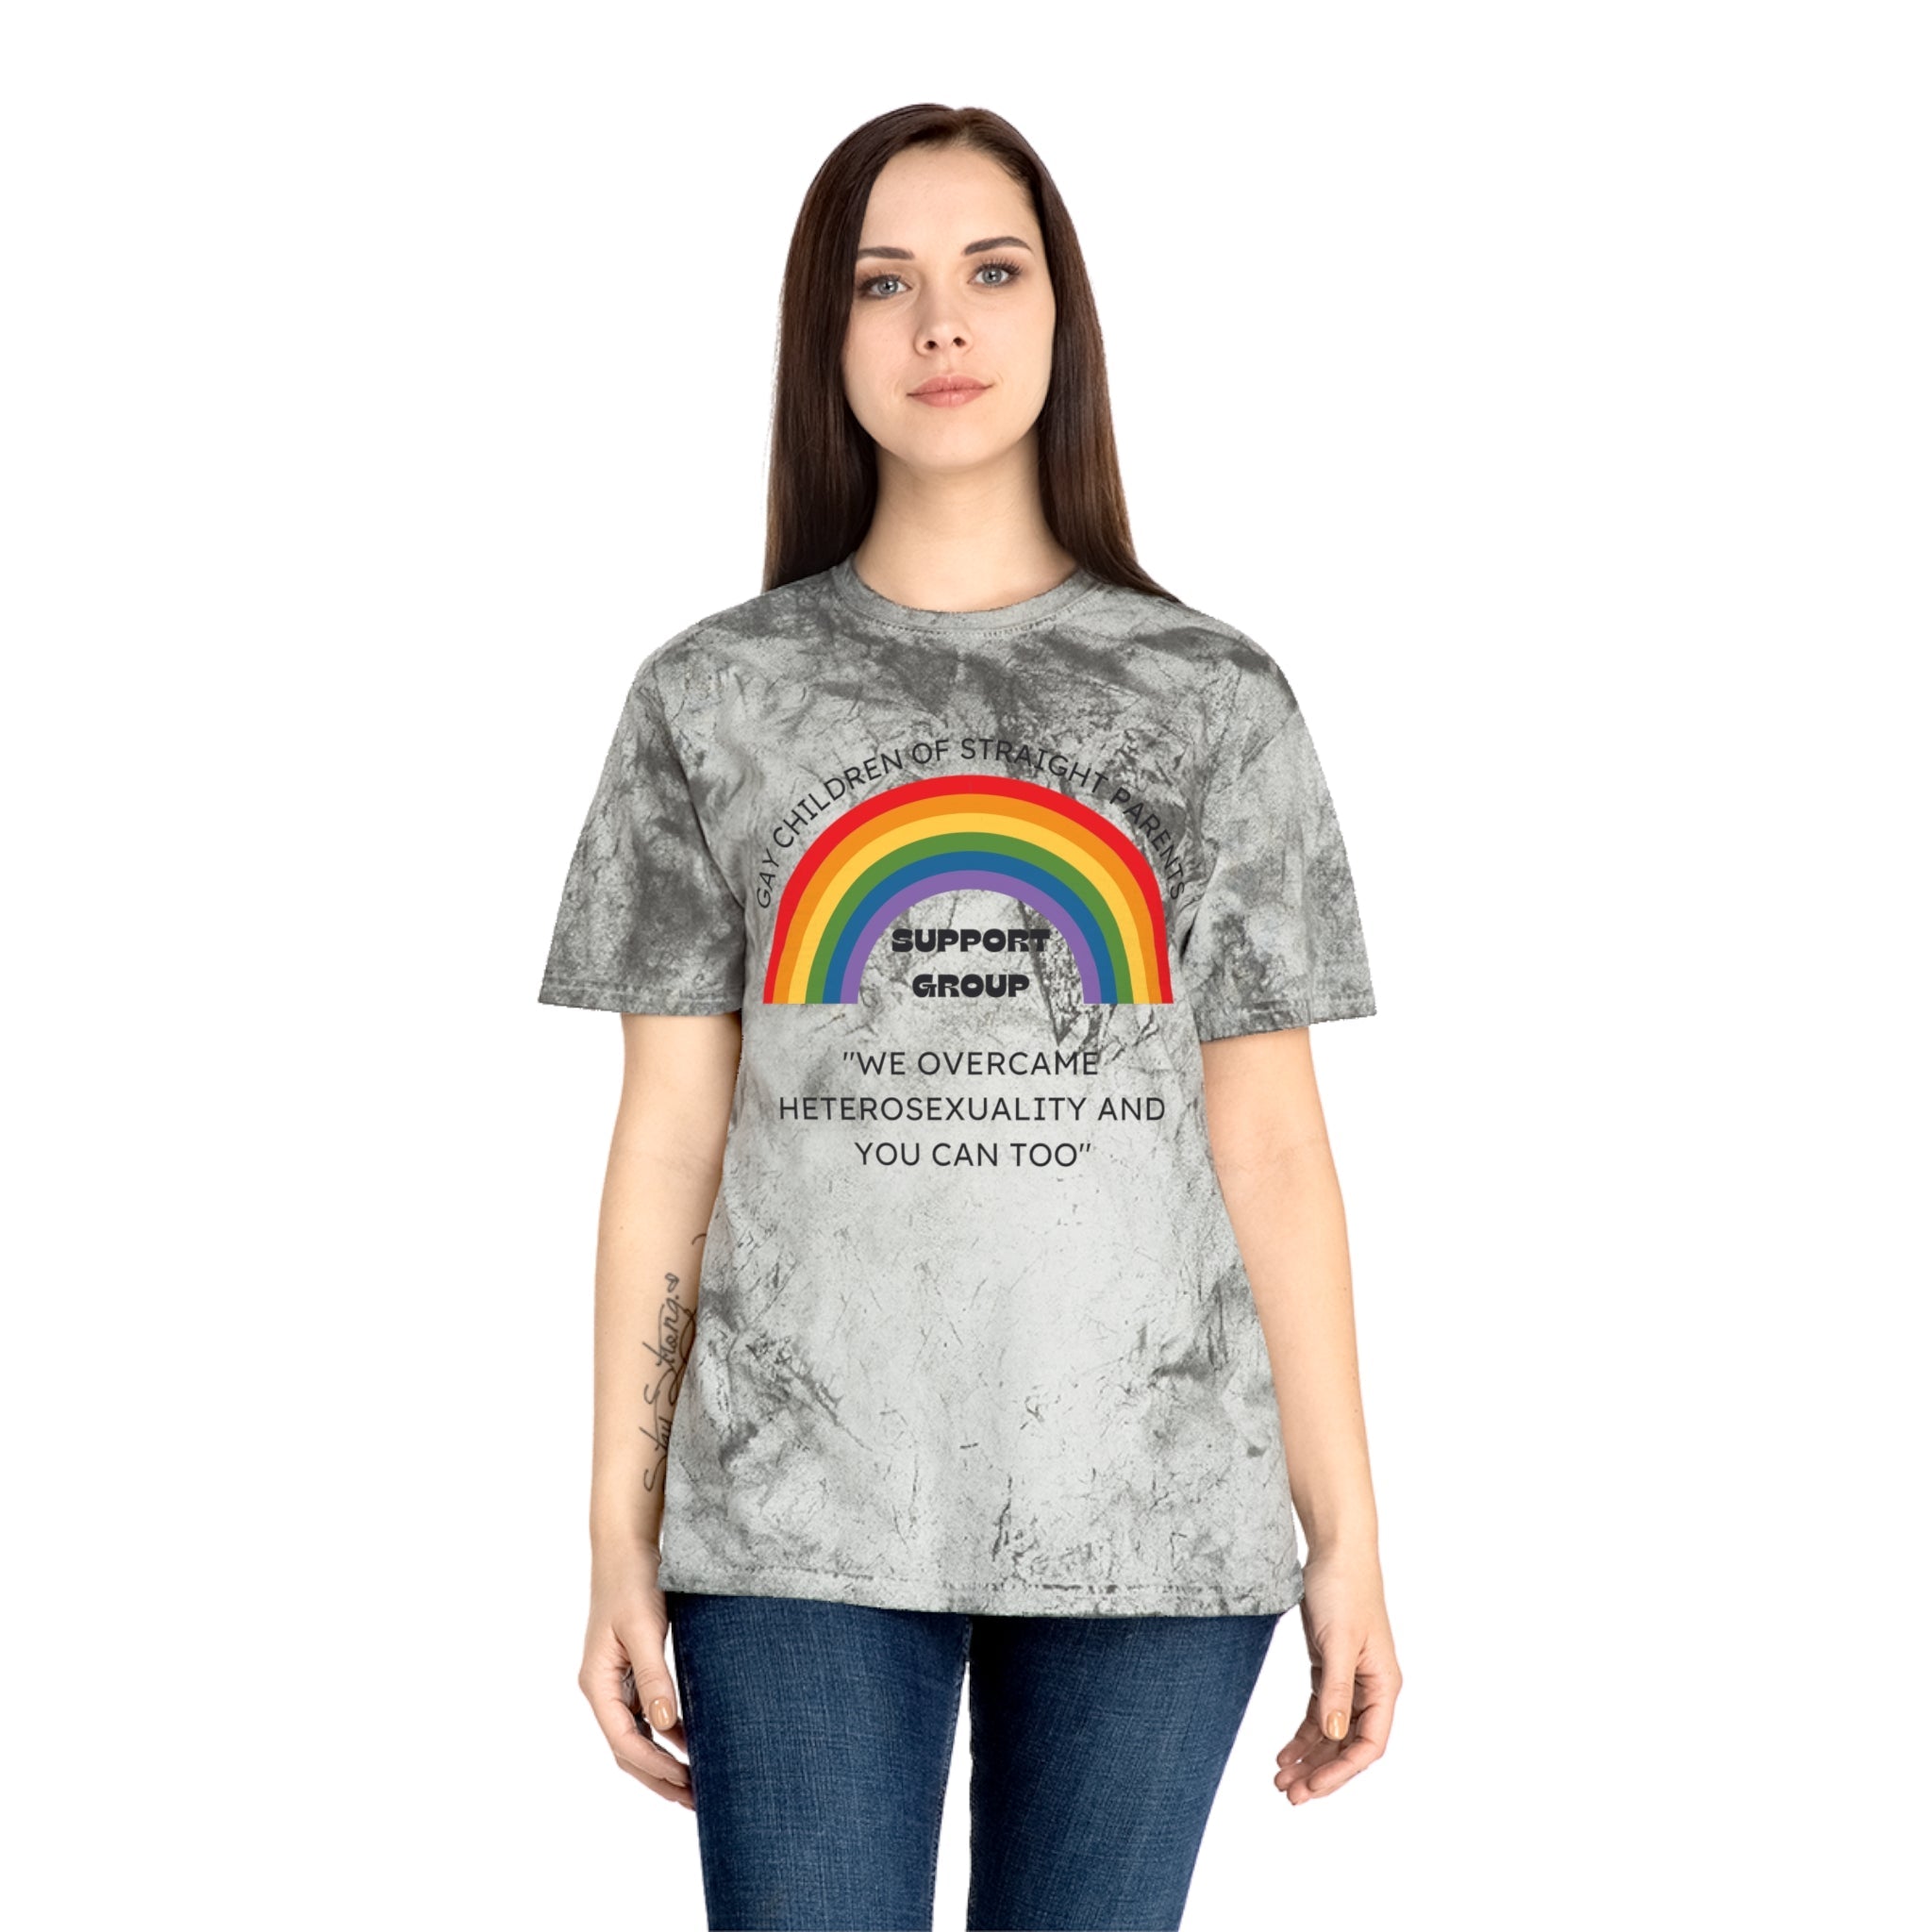 Gay Children of Straight Parents Support Group Unisex Color Blast